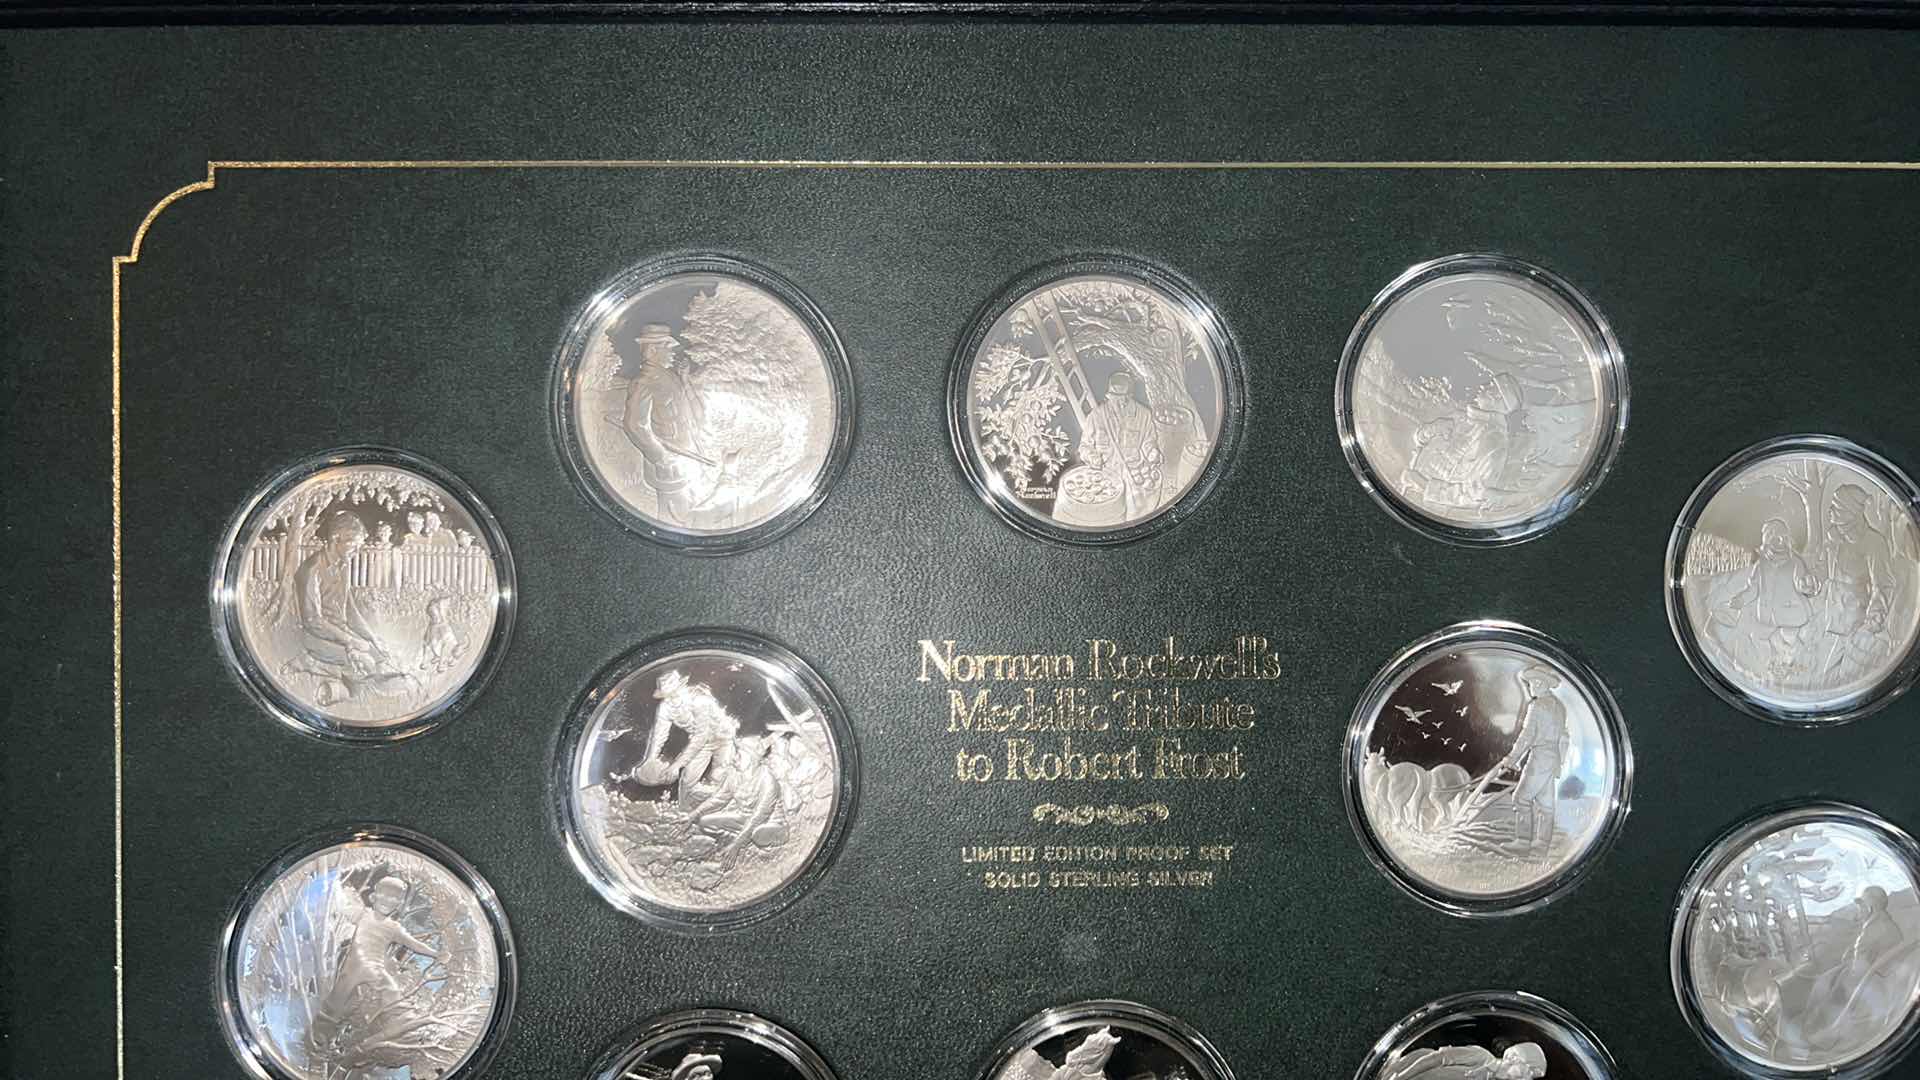 Photo 3 of NORMAN ROCKWELL’S MEDALLIC TRIBUTE TO ROBERT FROST -LIMITED EDITION PROOF SET SOLID STERLING SILVER